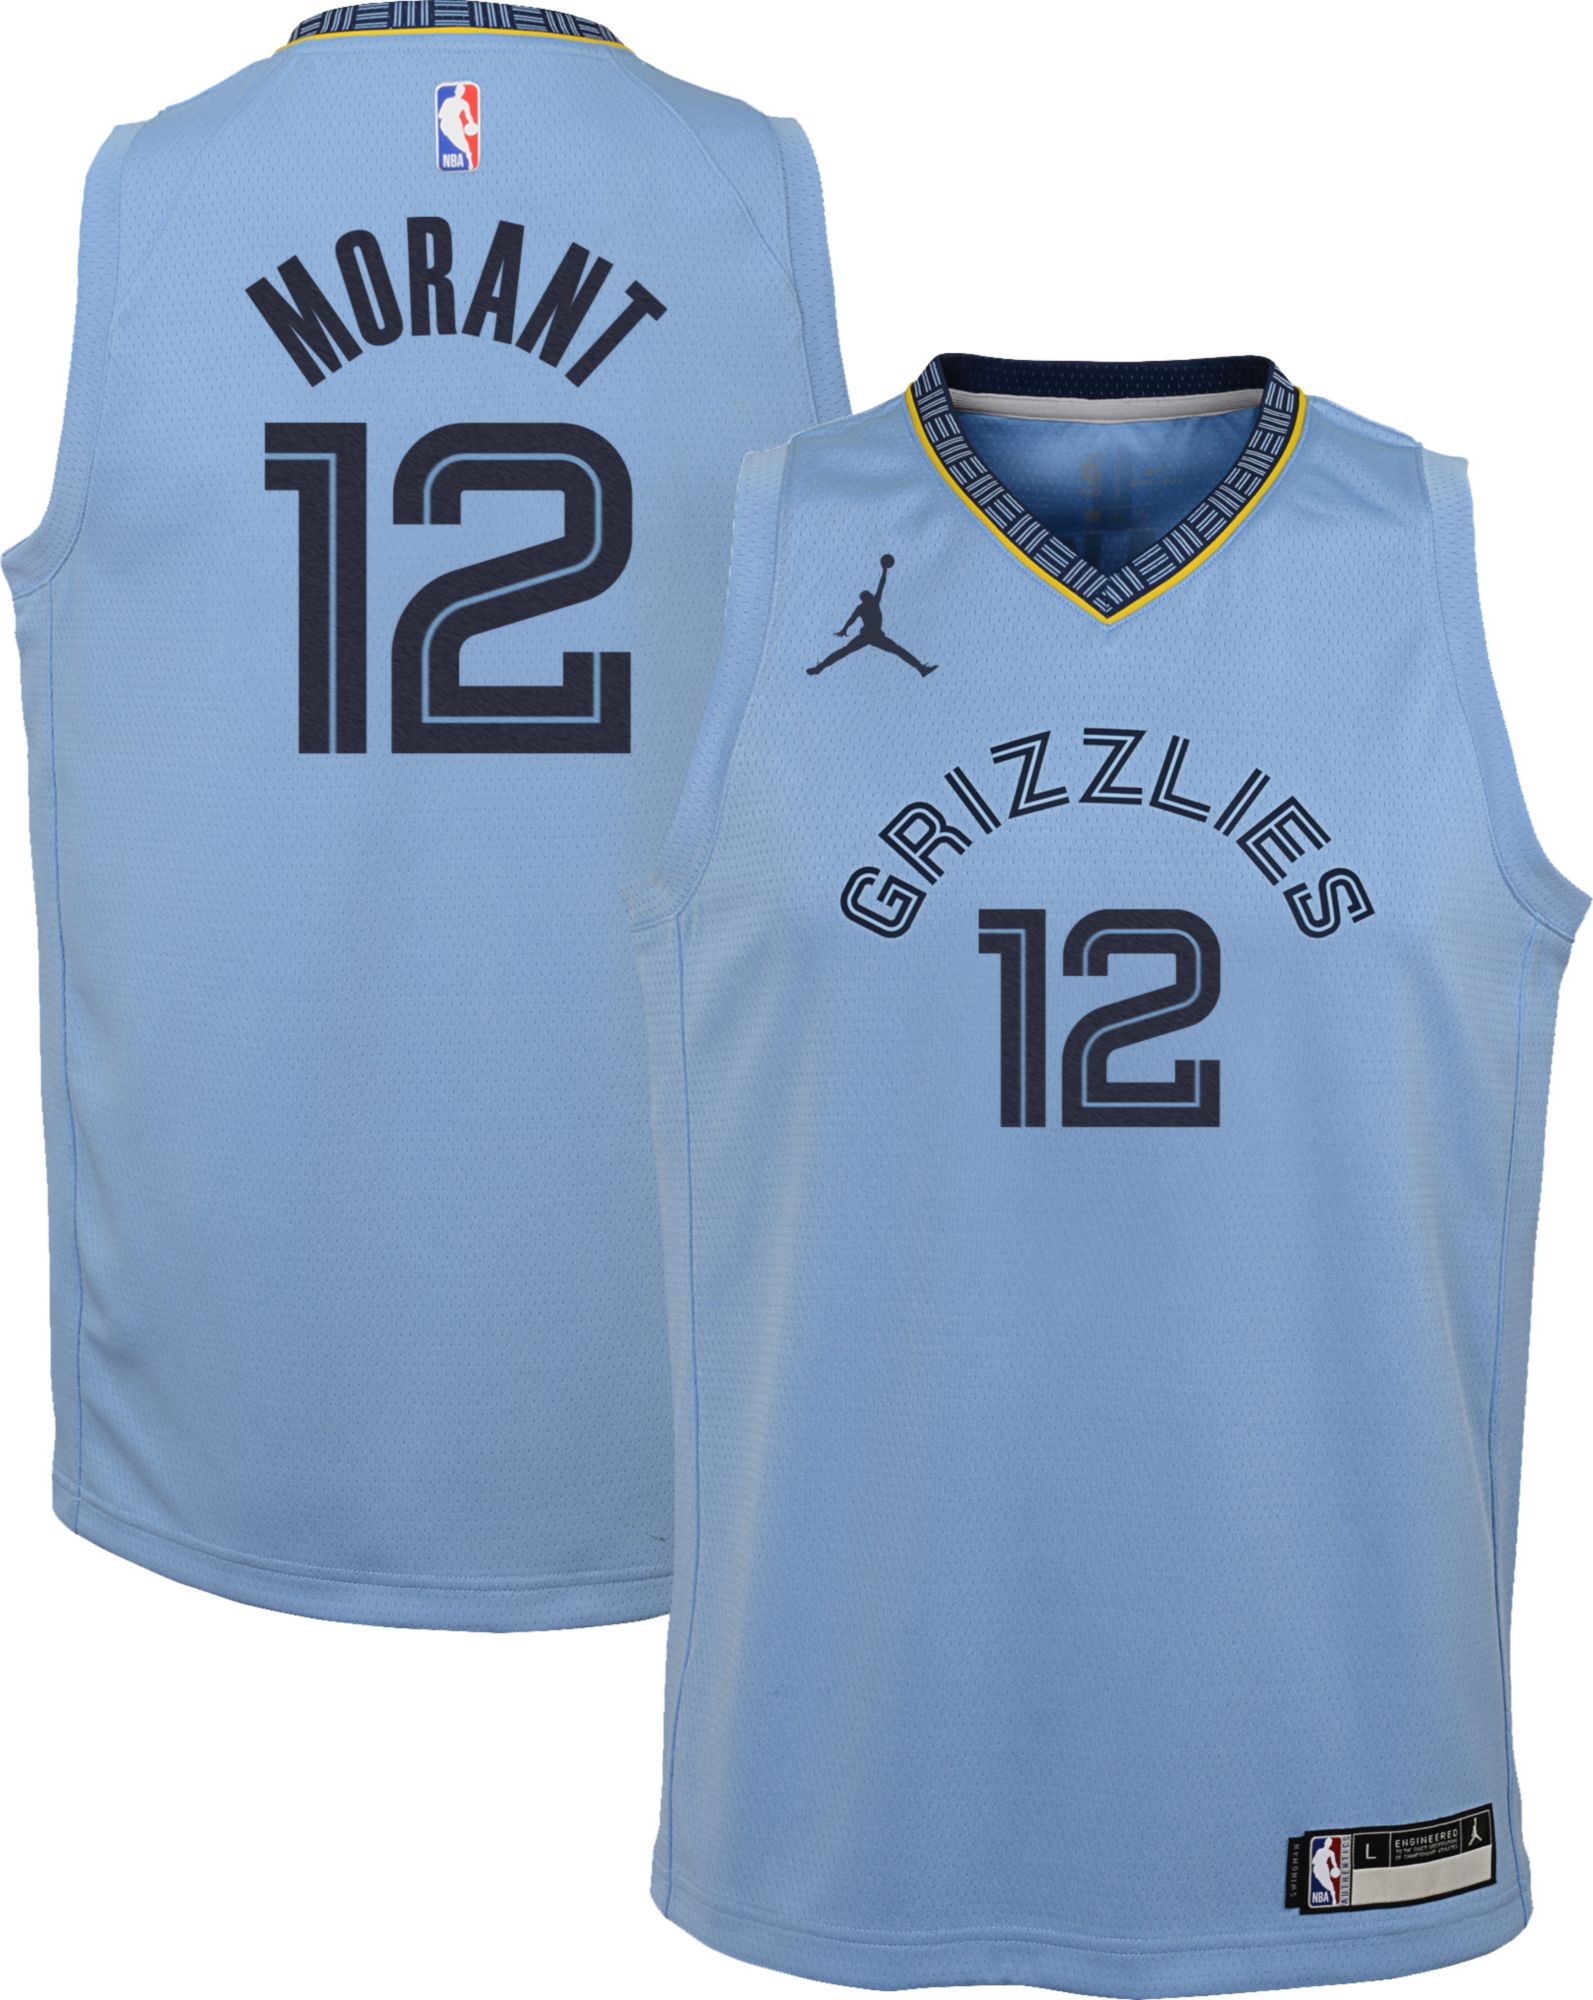 morant youth jersey